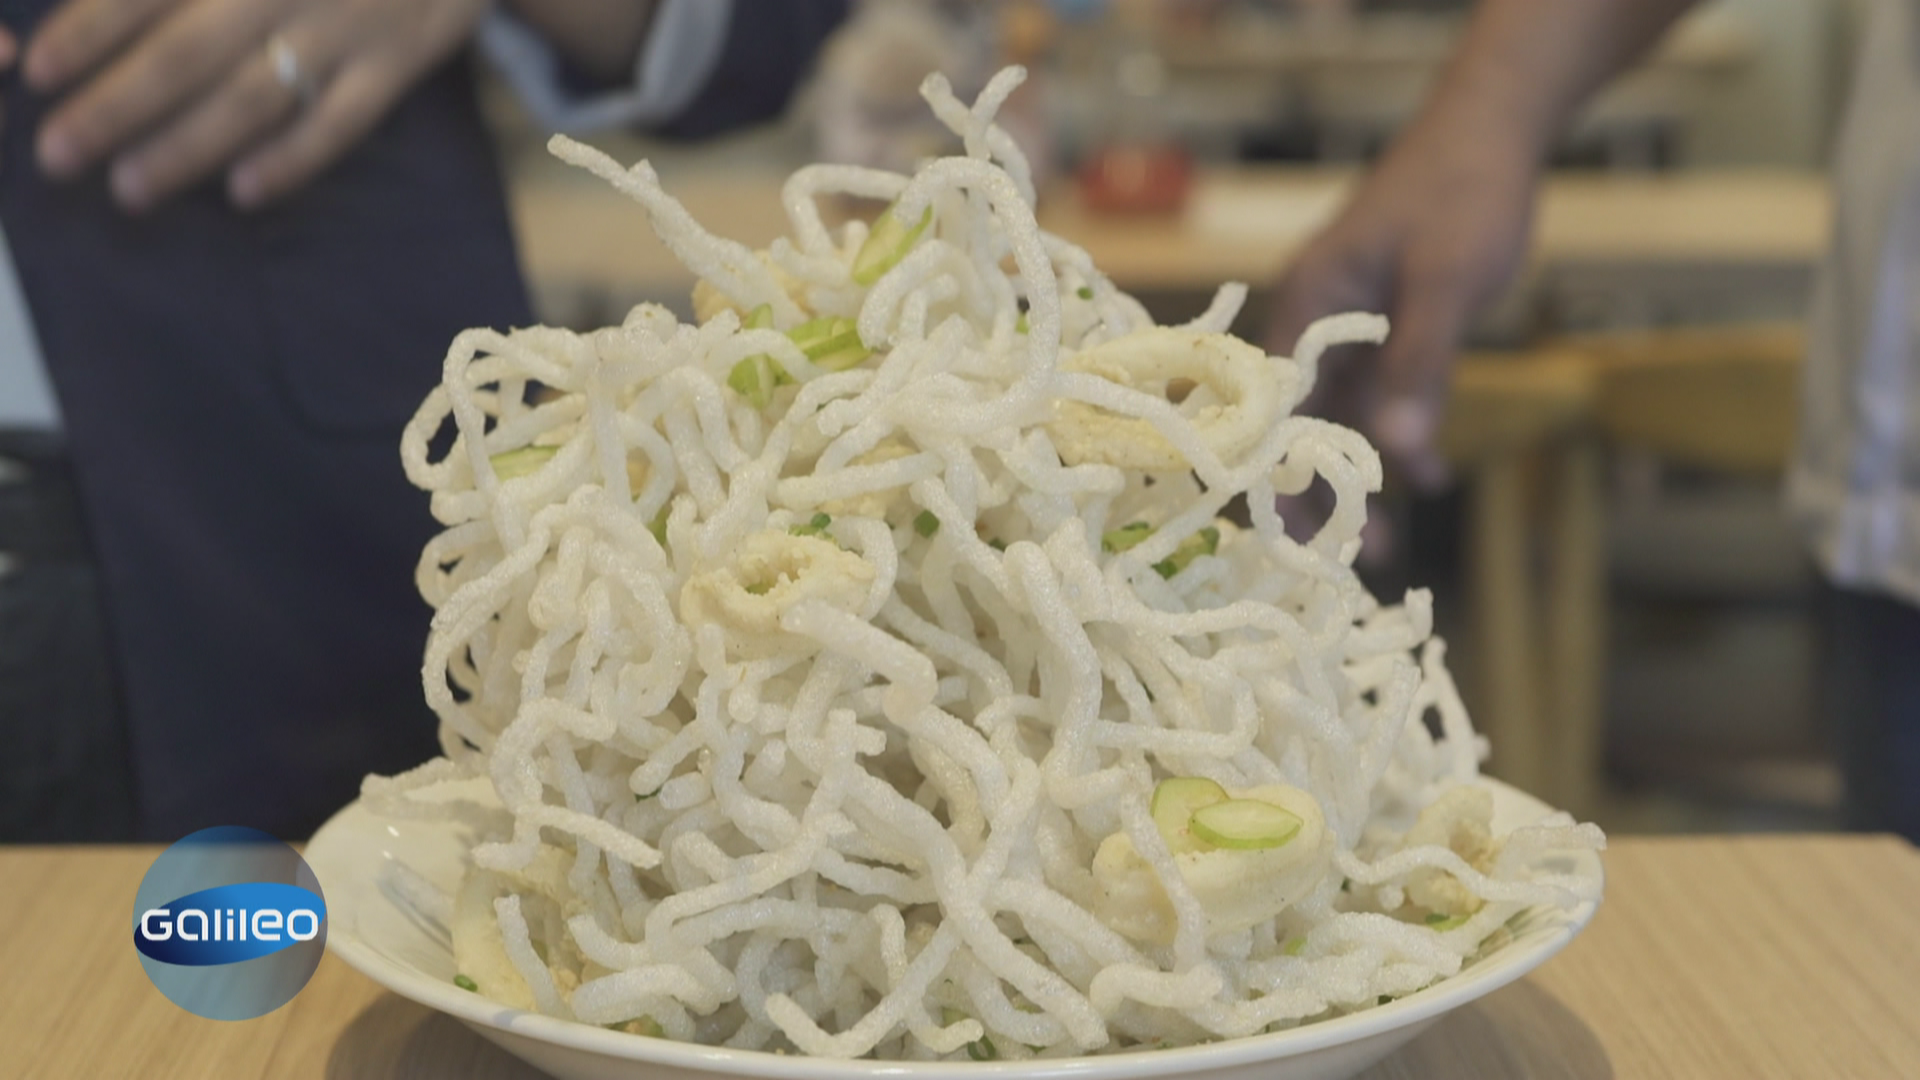 Melting noodle: The impostor noodles from the Philippines